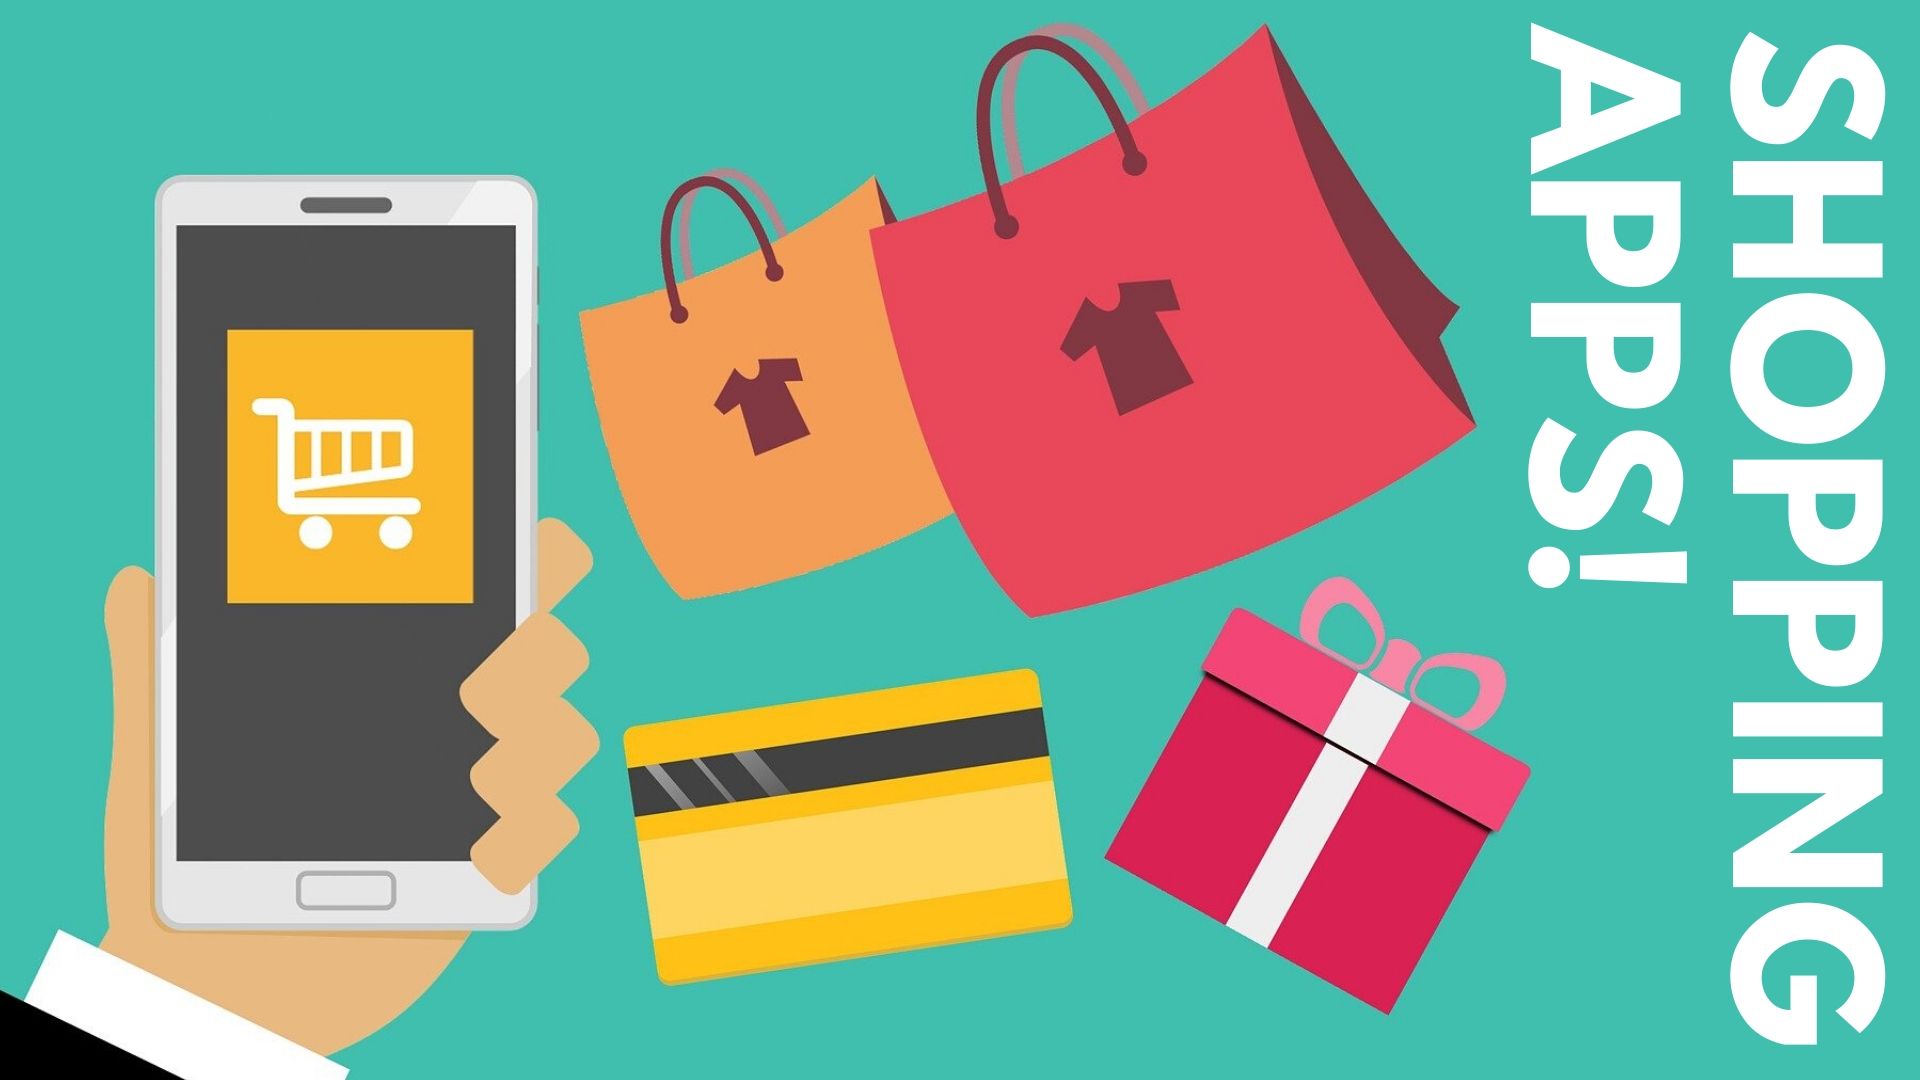 Online Shopping Android Apps in india - listed with thair popularity rating